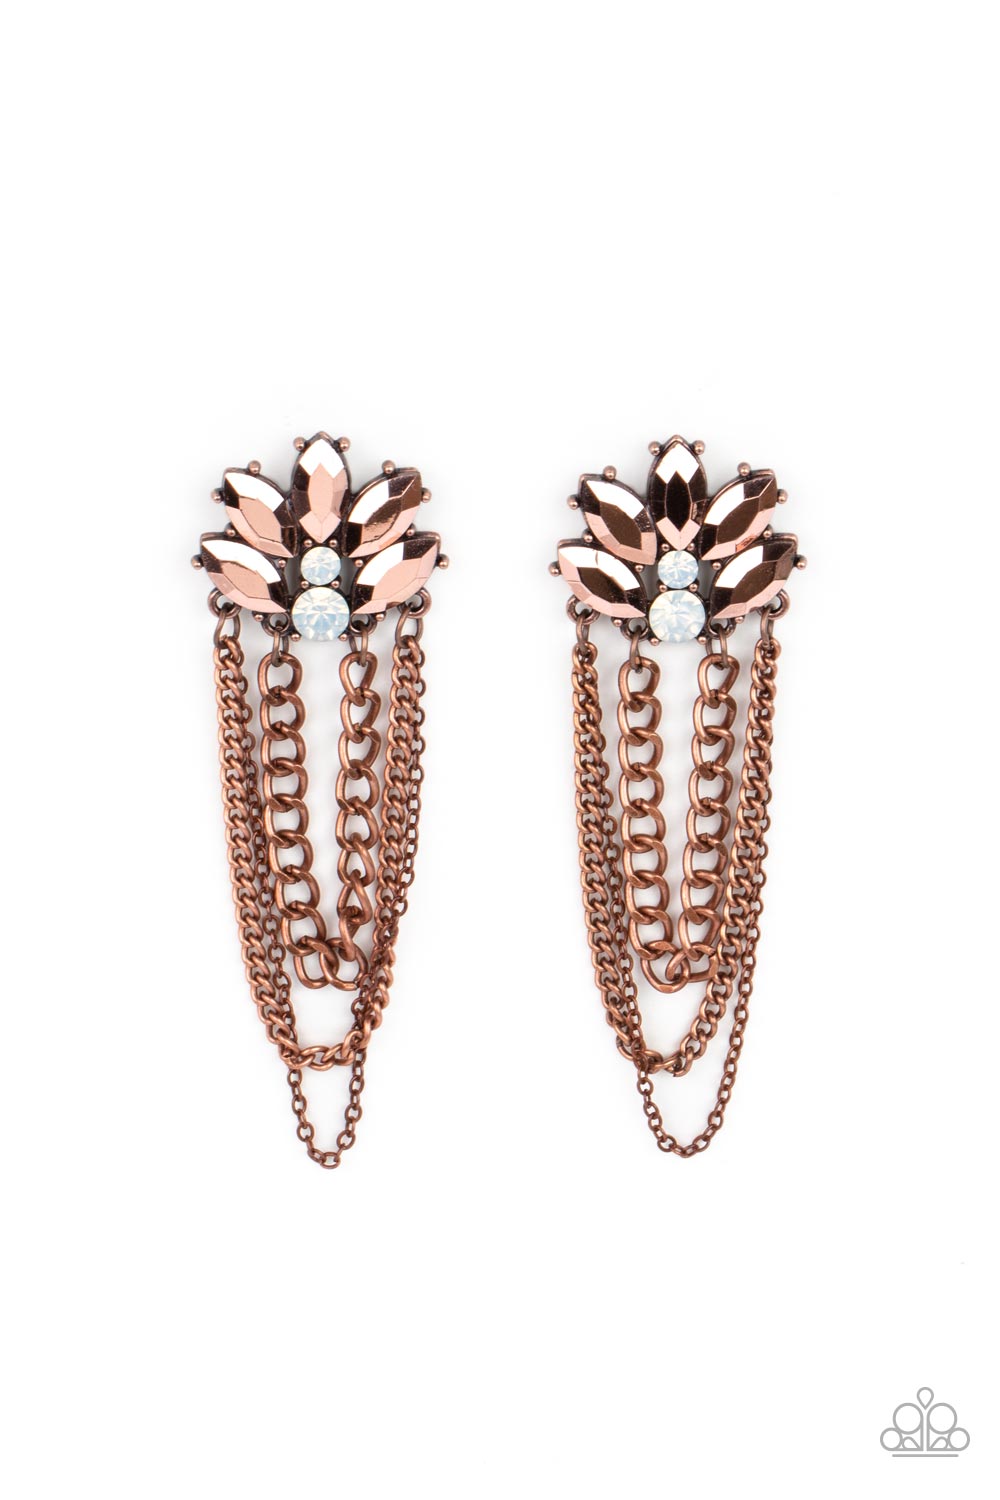 Paparazzi Earrings - Reach for the SKYSCRAPERS - Copper